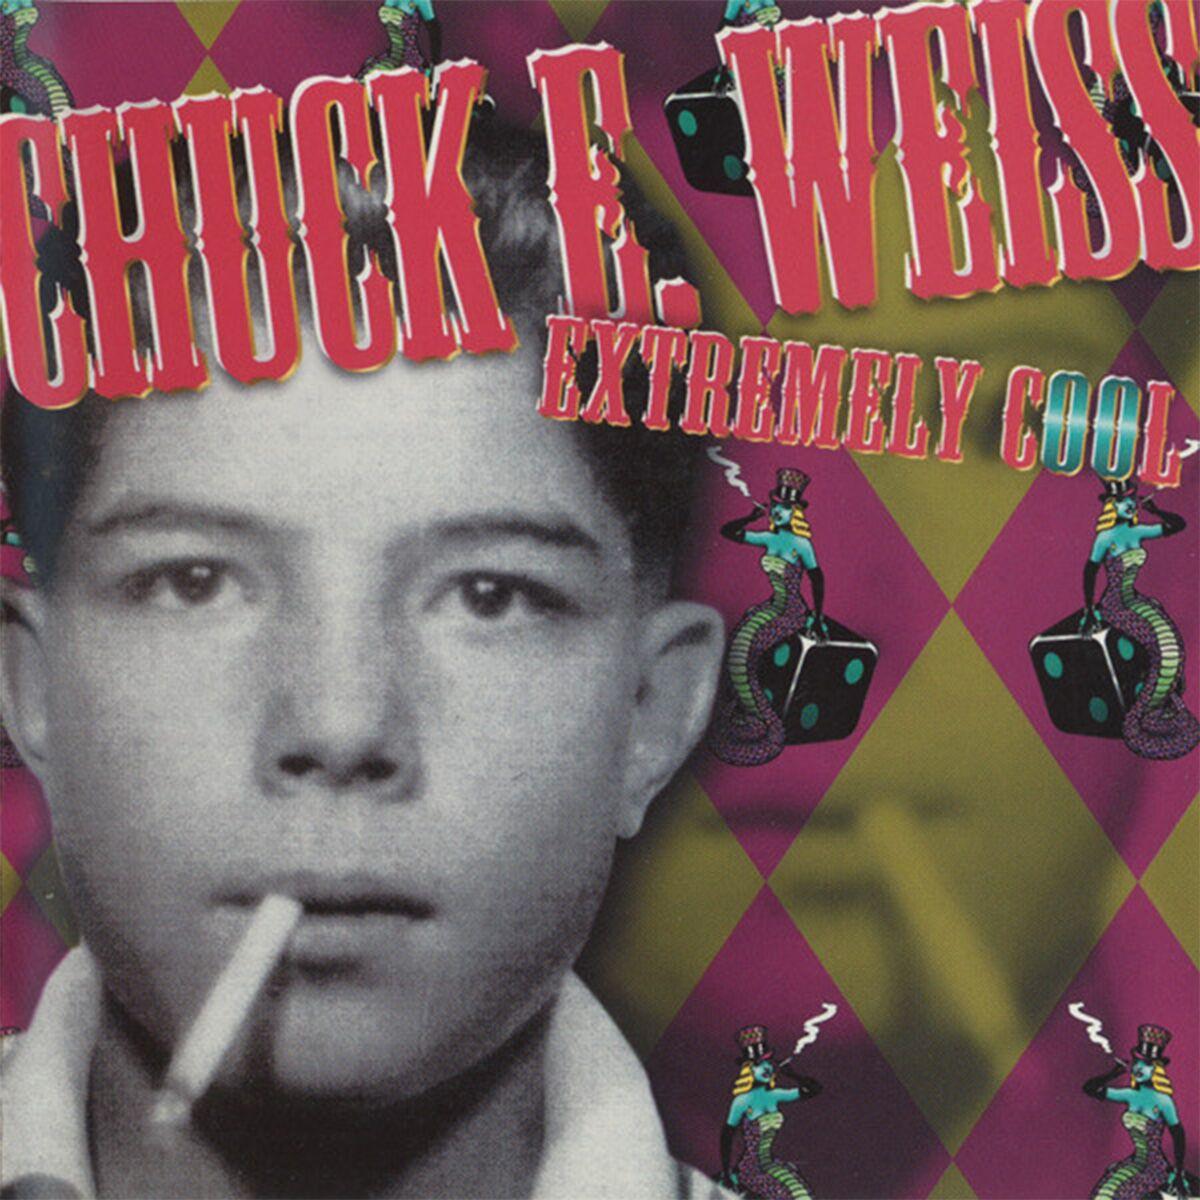 Weiss Chuck E. Extremely Cool (Coloured) LP